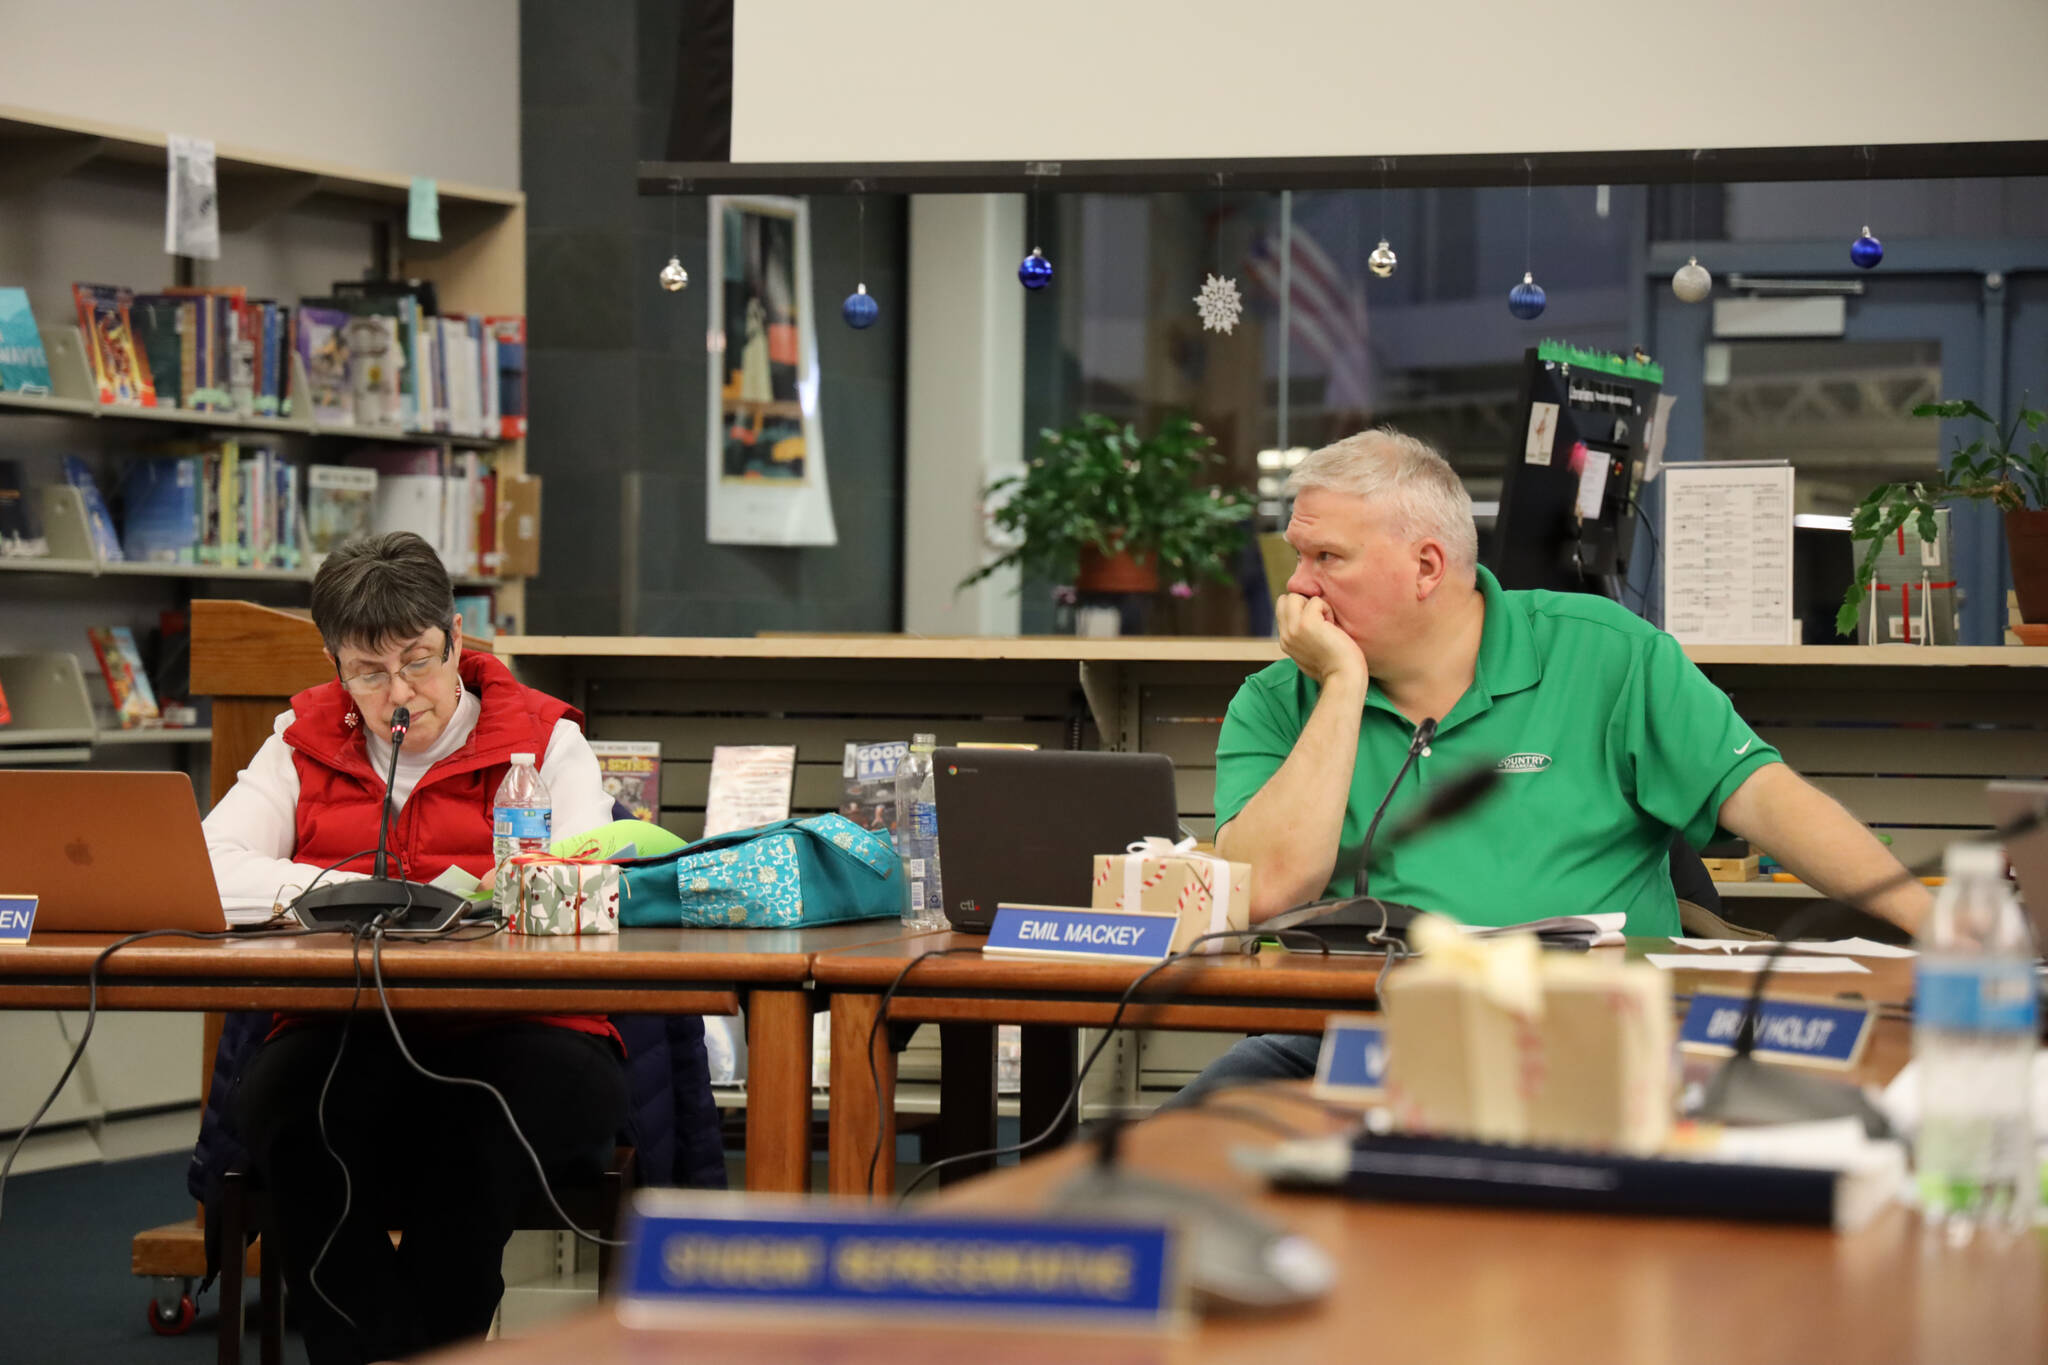 Juneau School Board President Deedie Sorensen and Vice President Emil Mackey discuss ‘milk’ incident investigation bid and extending food vendor’s contract with board members Tuesday evening. (Clarise Larson / Juneau Empire)